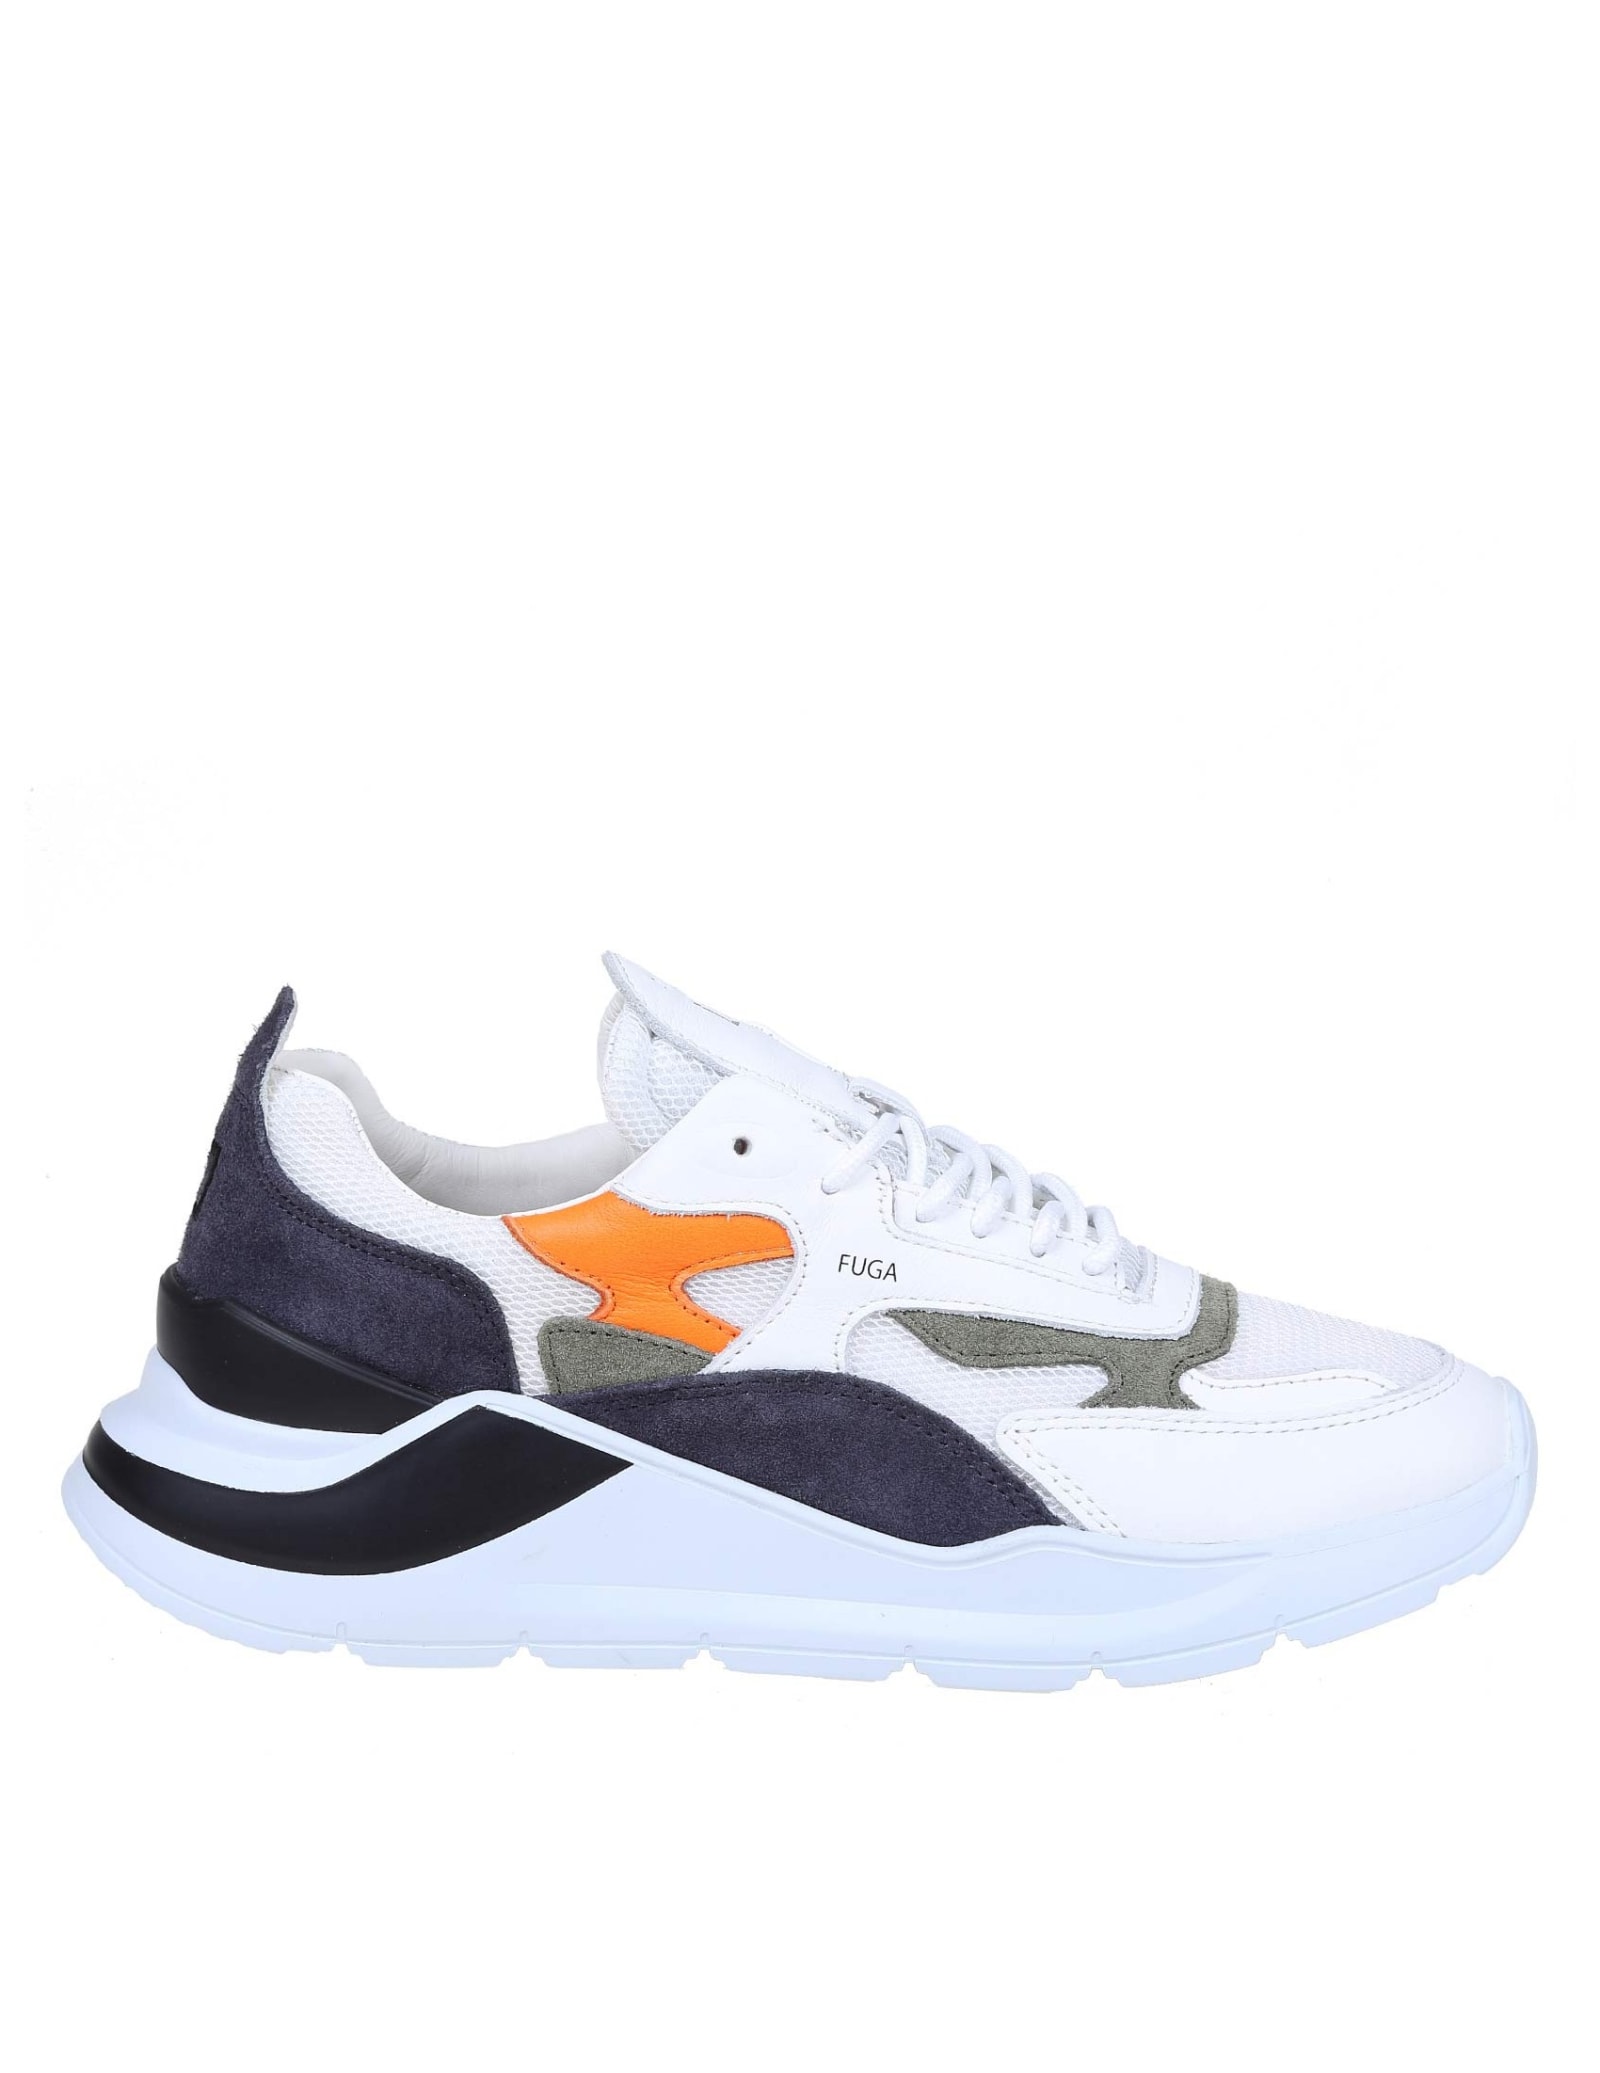 D.A.T.E. Fuga Sneakers In Leather And White Fabric